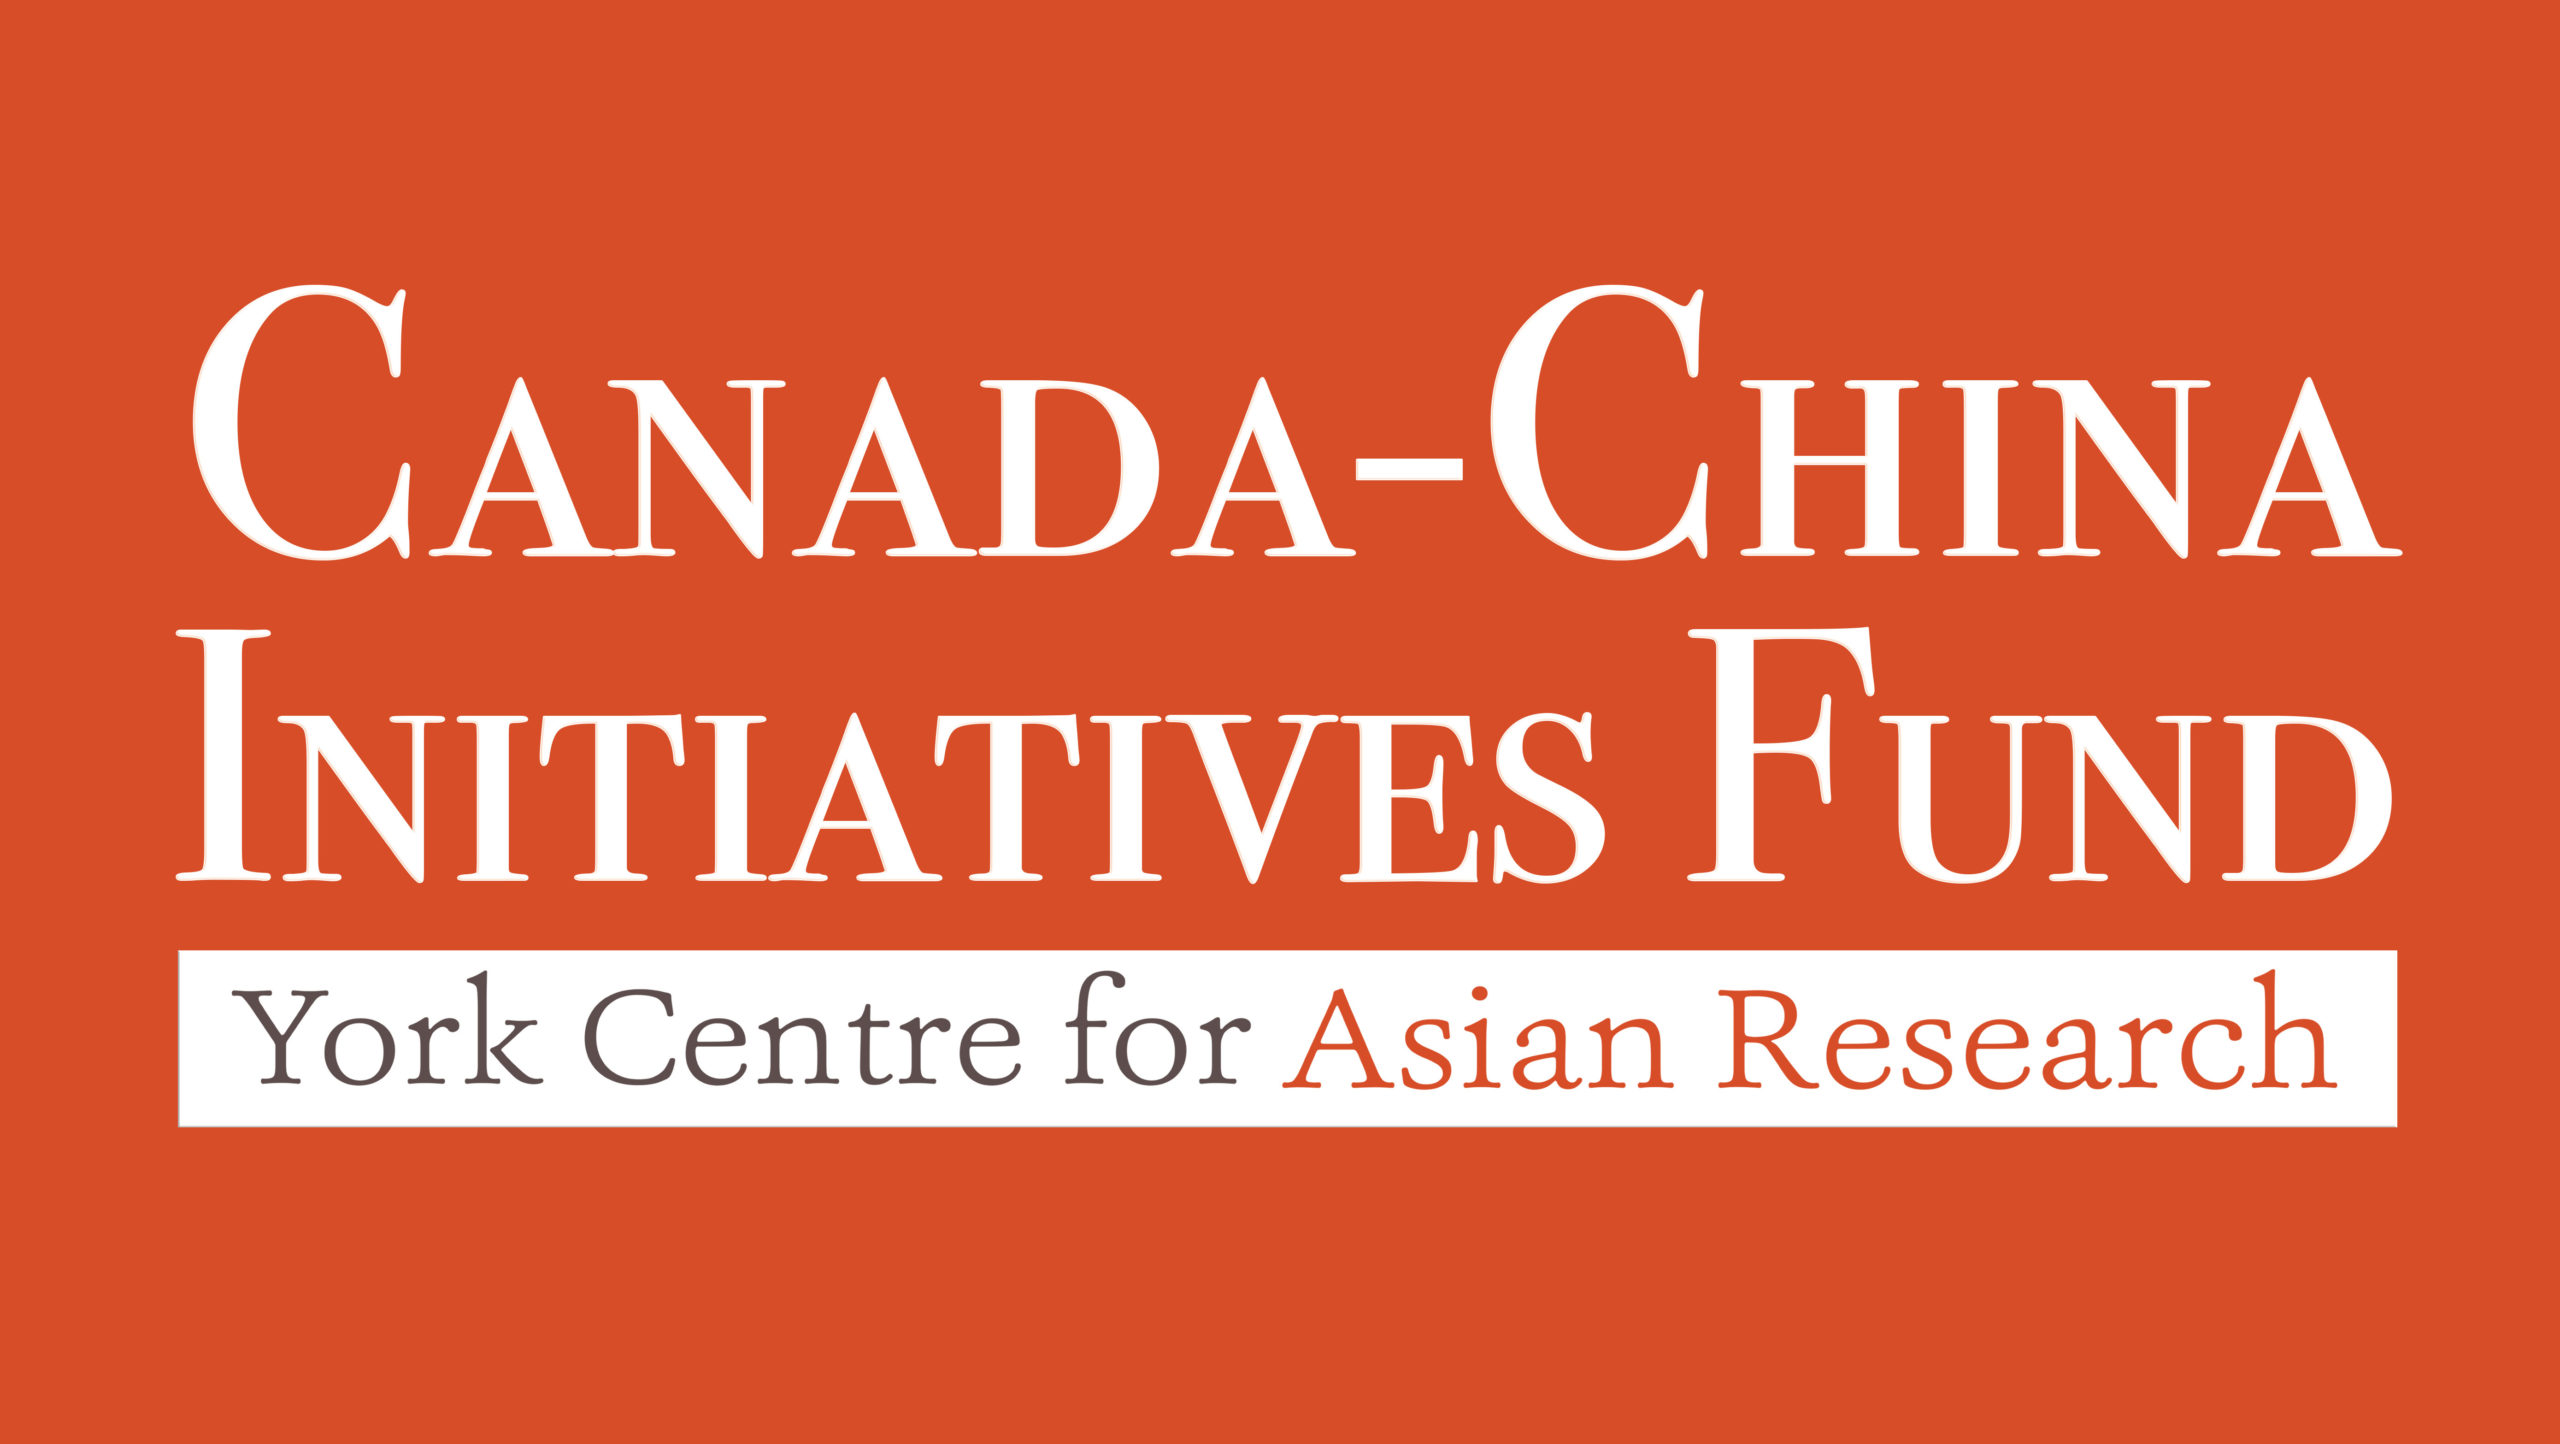 Congratulations to the 2020 recipients of the Canada-China Initiatives Fund (CCIF)